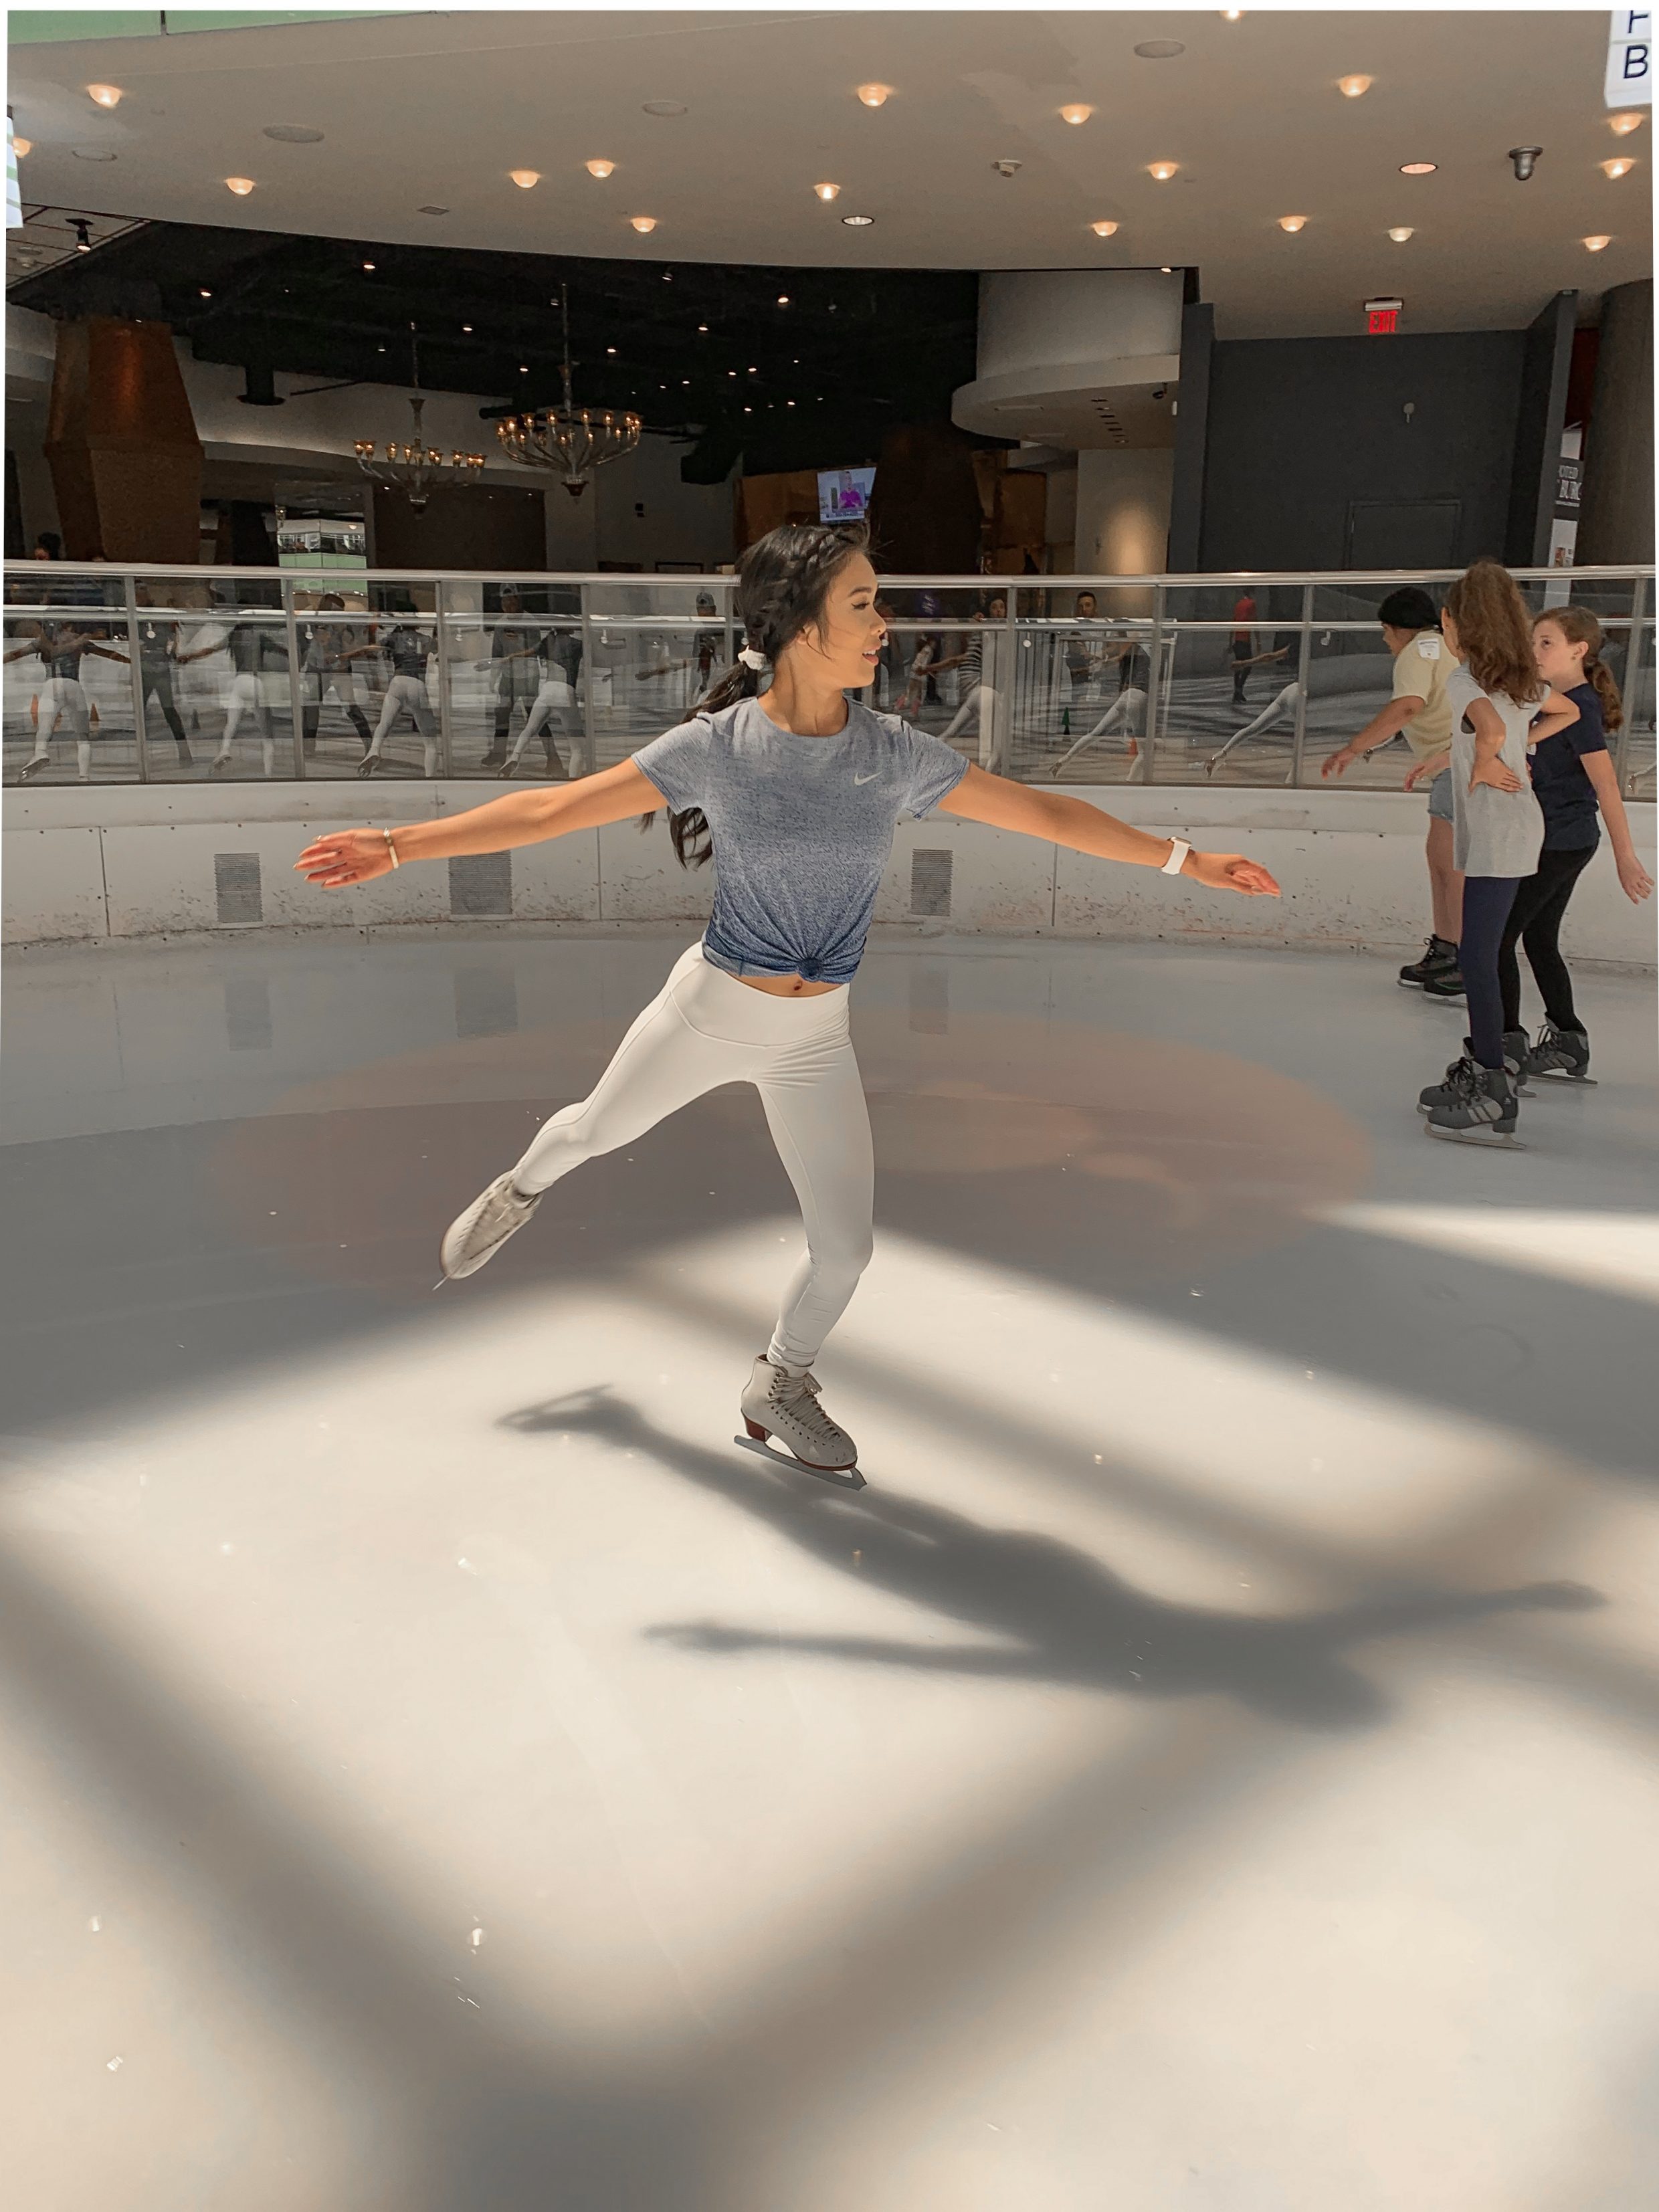 Ice skating outfit featuring blue dri-fit shirt and white high waisted leggings